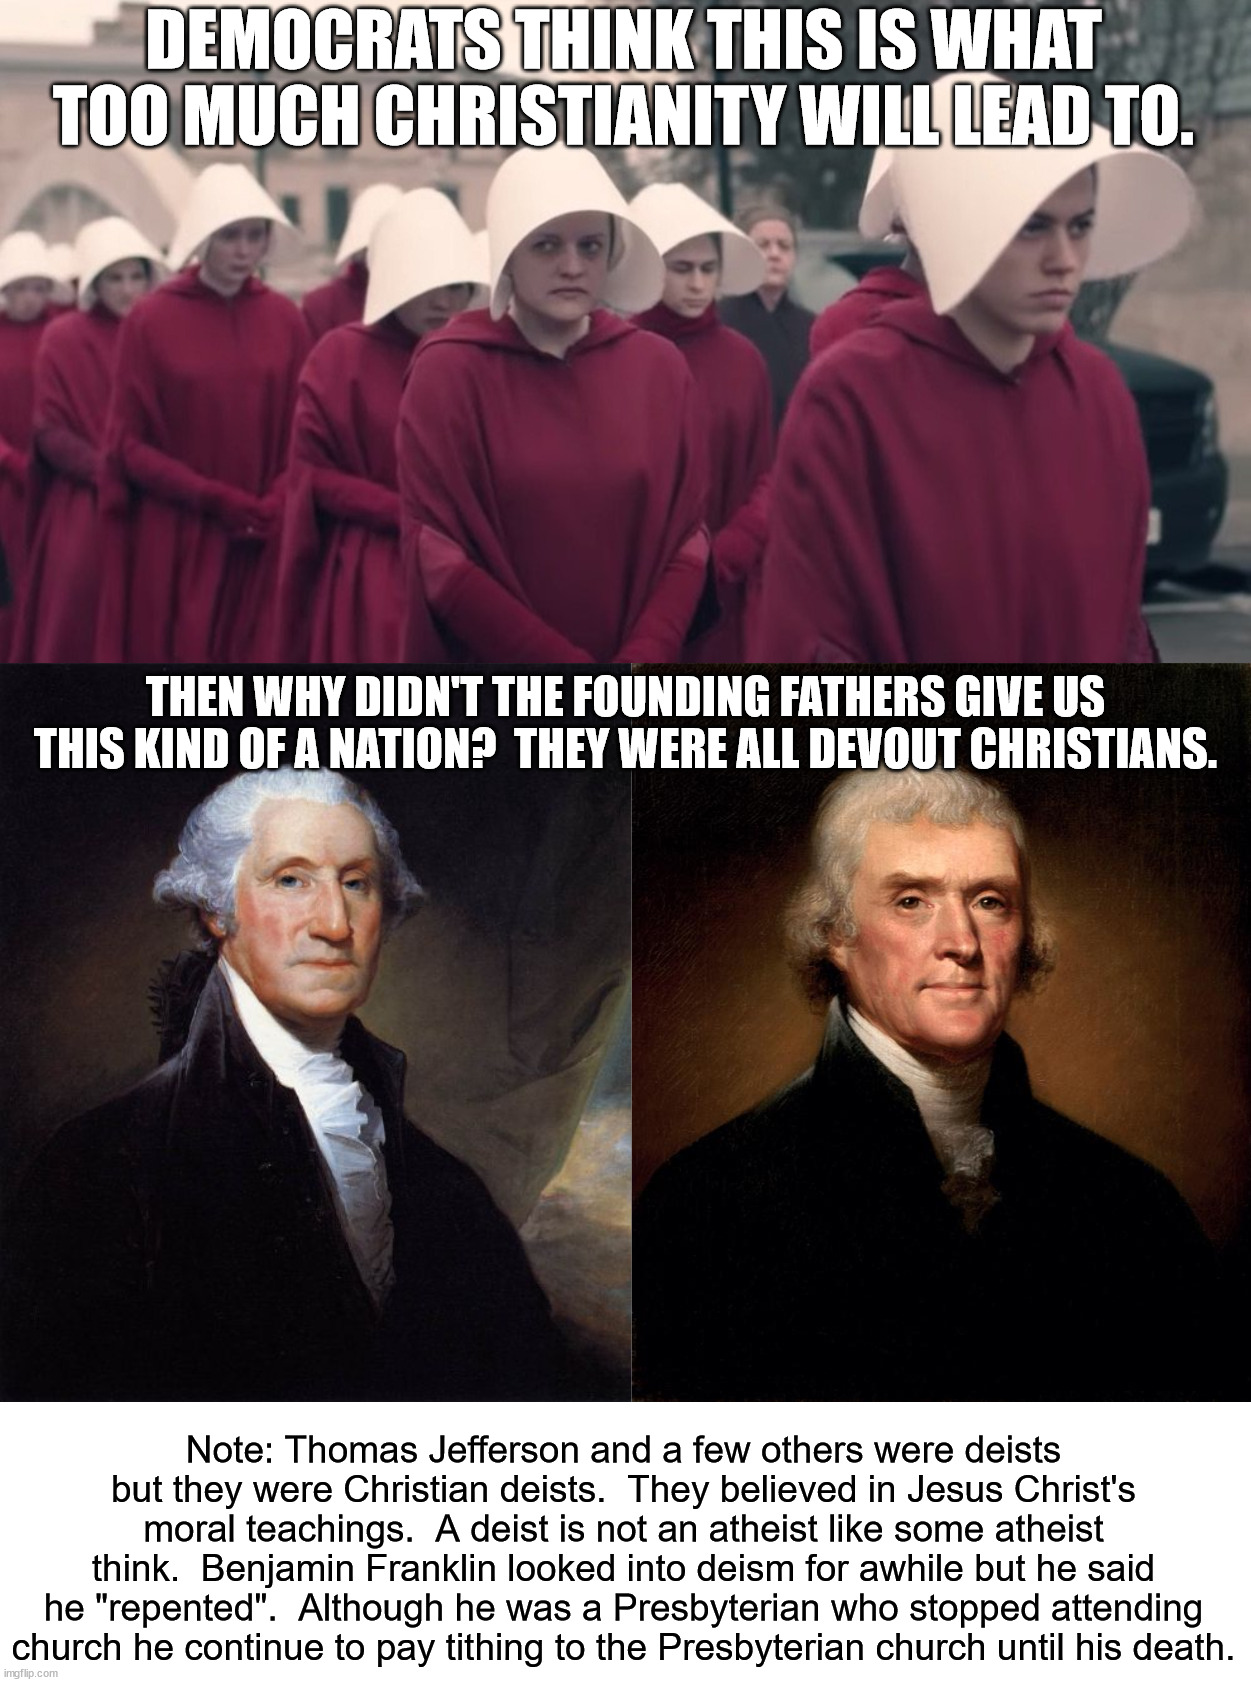 A Handmaids Tale is what socialism looks like.  Christianity is based on freedom, not tyranny. | DEMOCRATS THINK THIS IS WHAT TOO MUCH CHRISTIANITY WILL LEAD TO. THEN WHY DIDN'T THE FOUNDING FATHERS GIVE US THIS KIND OF A NATION?  THEY WERE ALL DEVOUT CHRISTIANS. Note: Thomas Jefferson and a few others were deists but they were Christian deists.  They believed in Jesus Christ's moral teachings.  A deist is not an atheist like some atheist think.  Benjamin Franklin looked into deism for awhile but he said he "repented".  Although he was a Presbyterian who stopped attending church he continue to pay tithing to the Presbyterian church until his death. | image tagged in handmaids tale,george washington,thomas jefferson | made w/ Imgflip meme maker